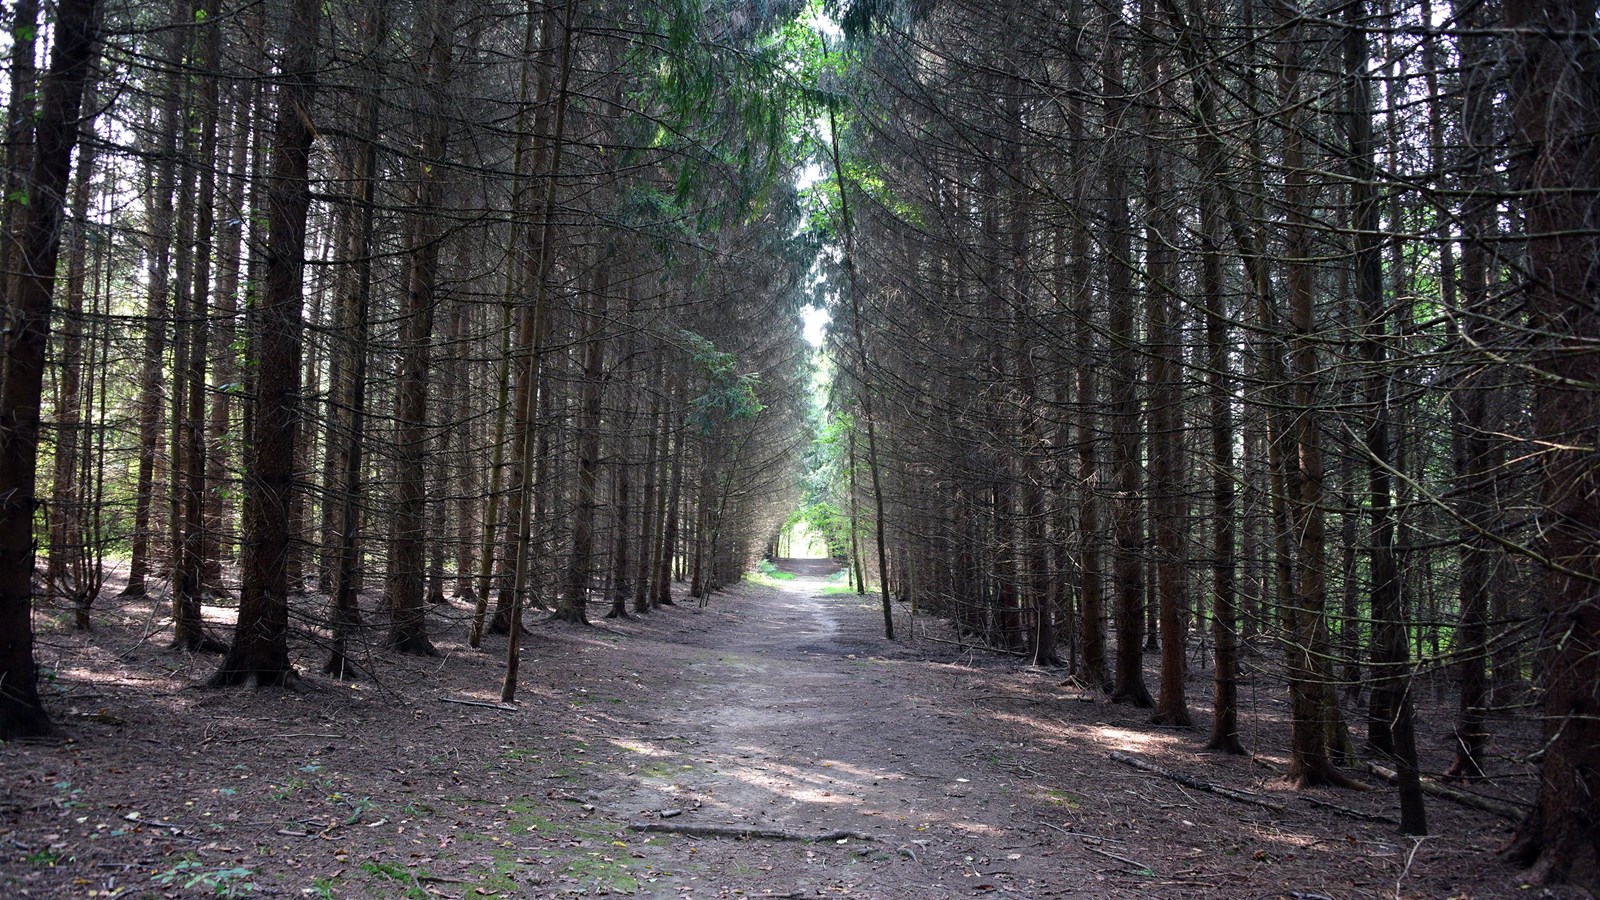 View down a wide, unpaved trail through a forest of evergreens growing close together in rows.